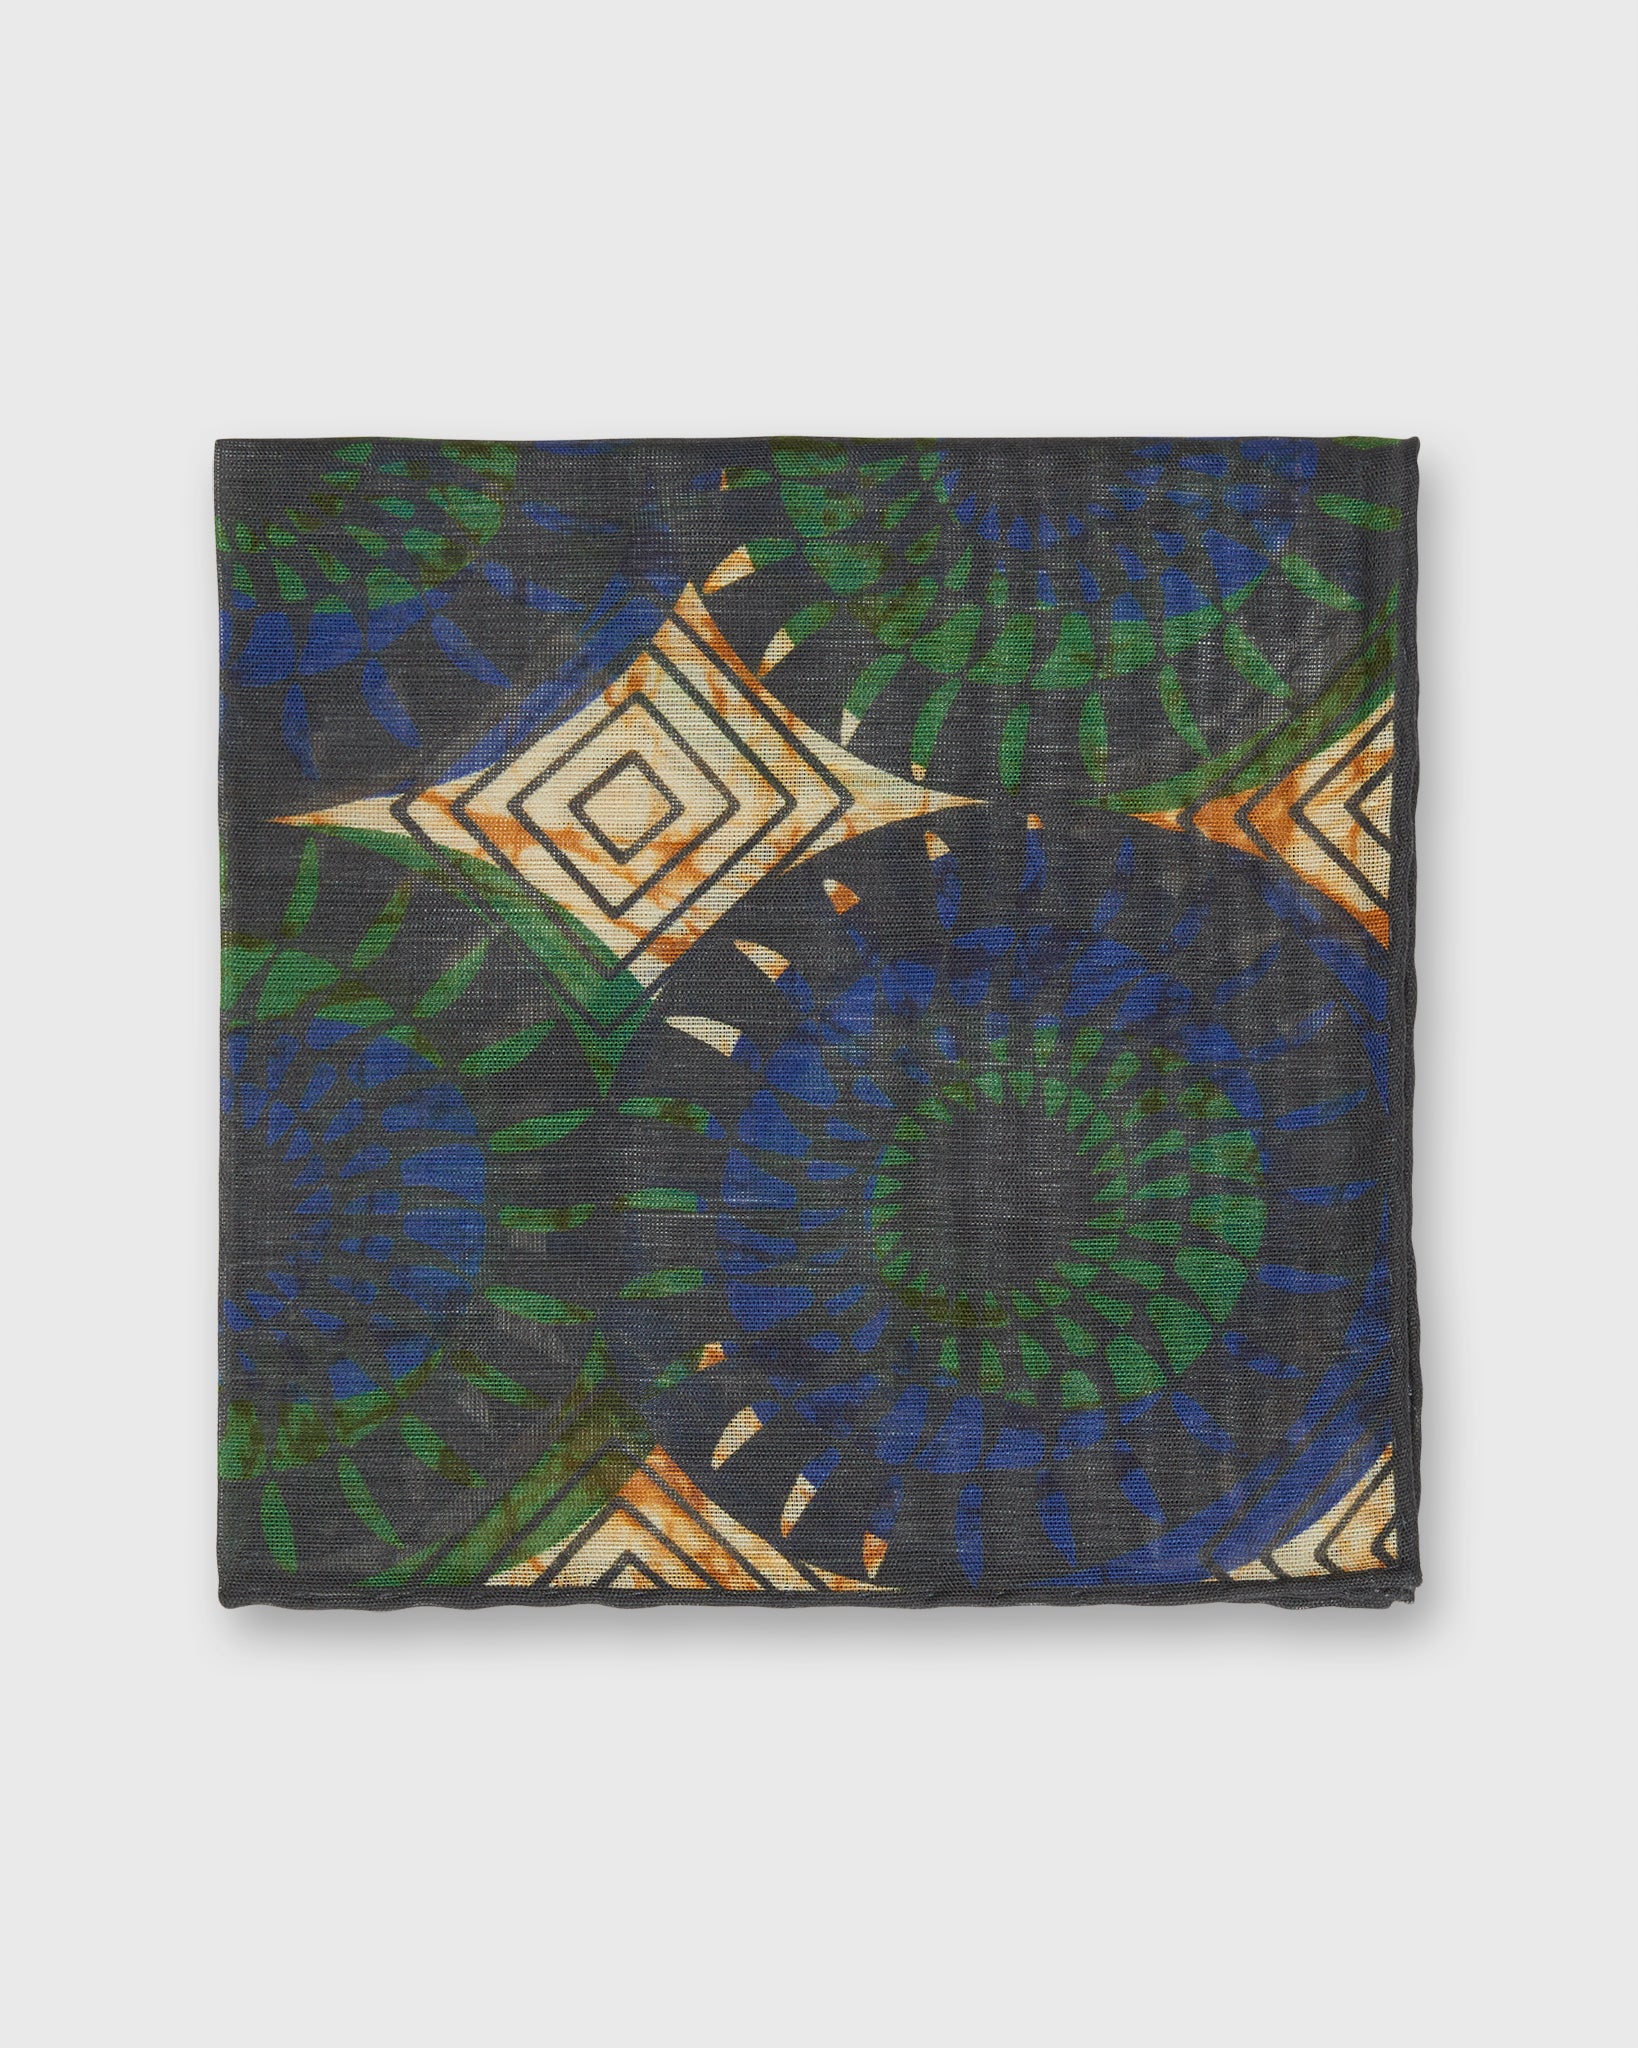 Cotton/Linen Print Pocket Square in Blue/Green Abstract Spiral